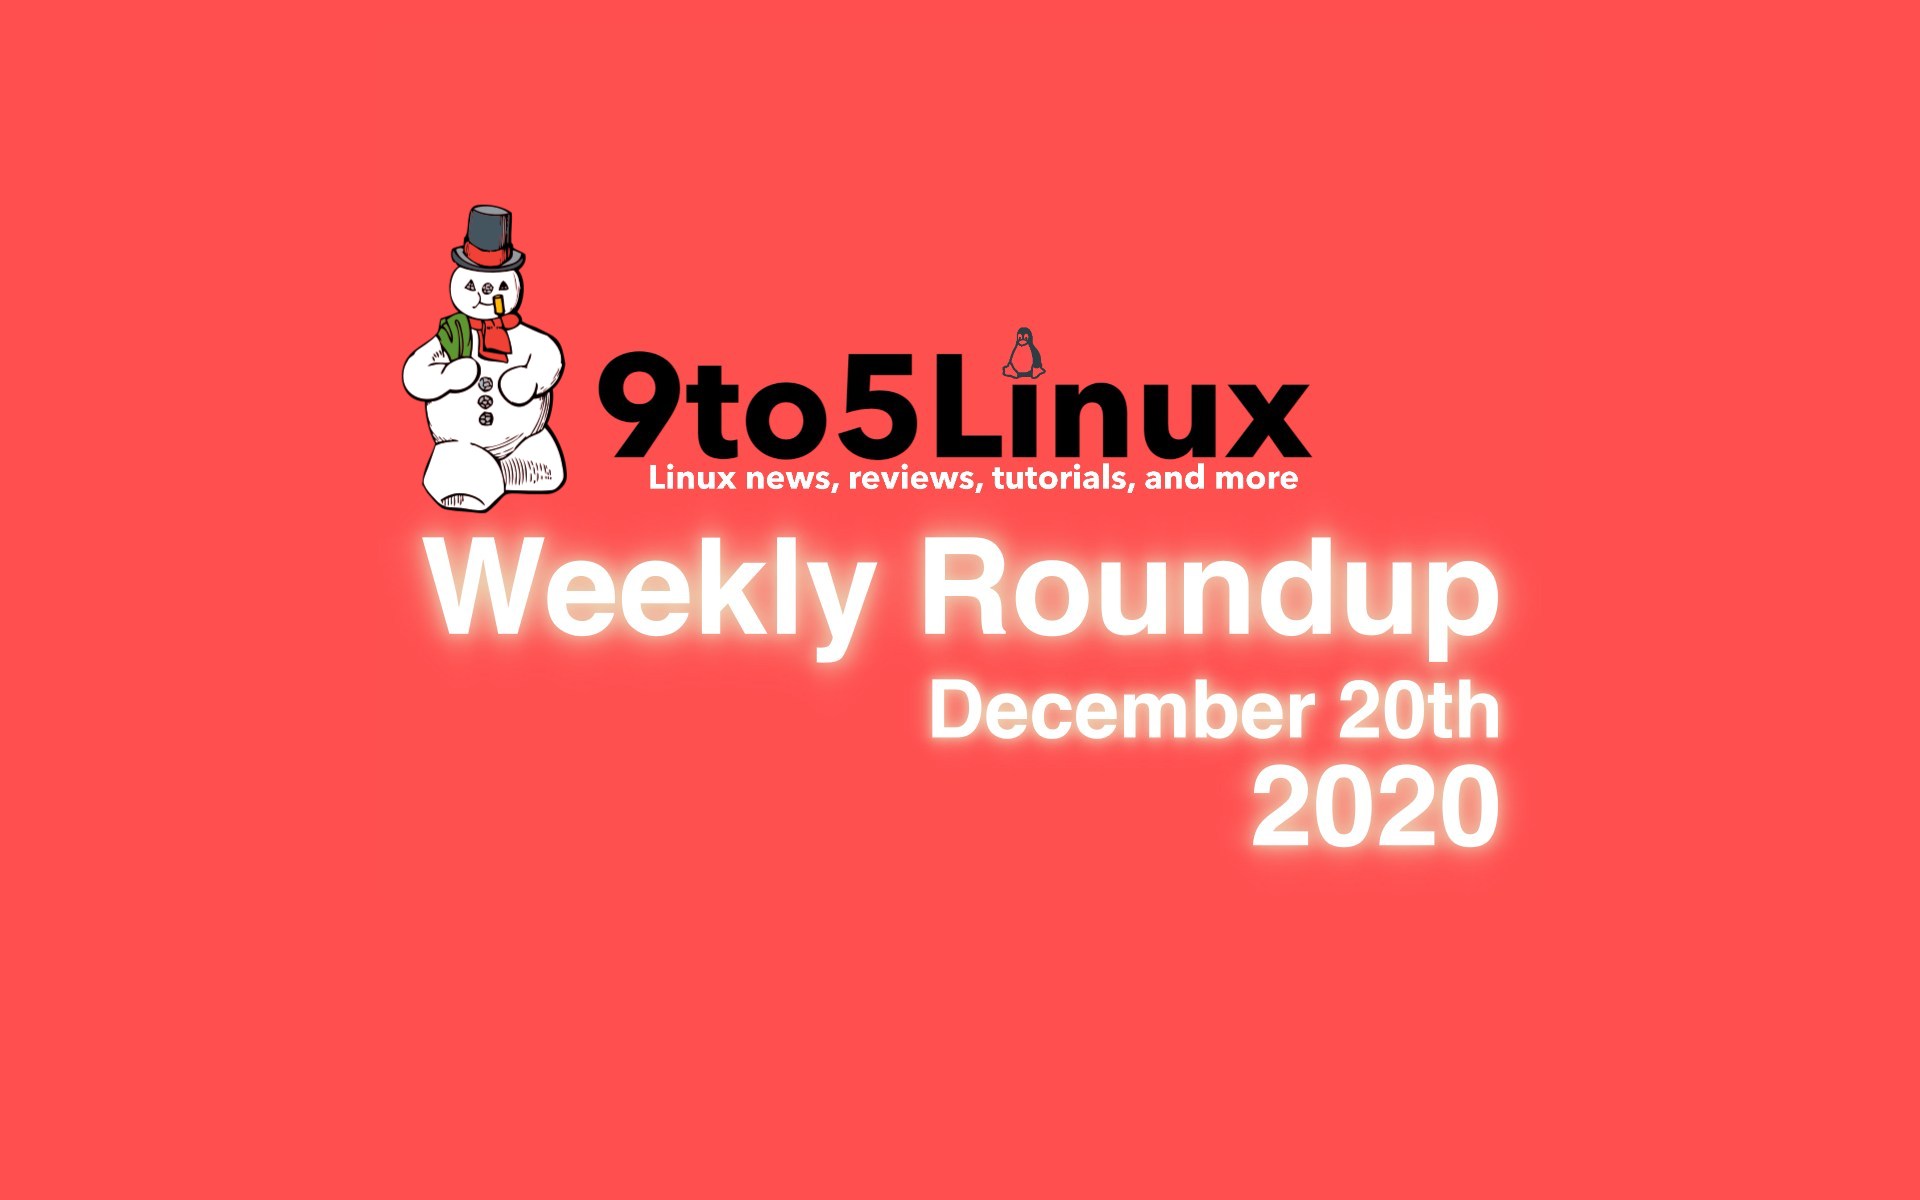 9to5Linux Weekly Roundup: December 20th, 2020